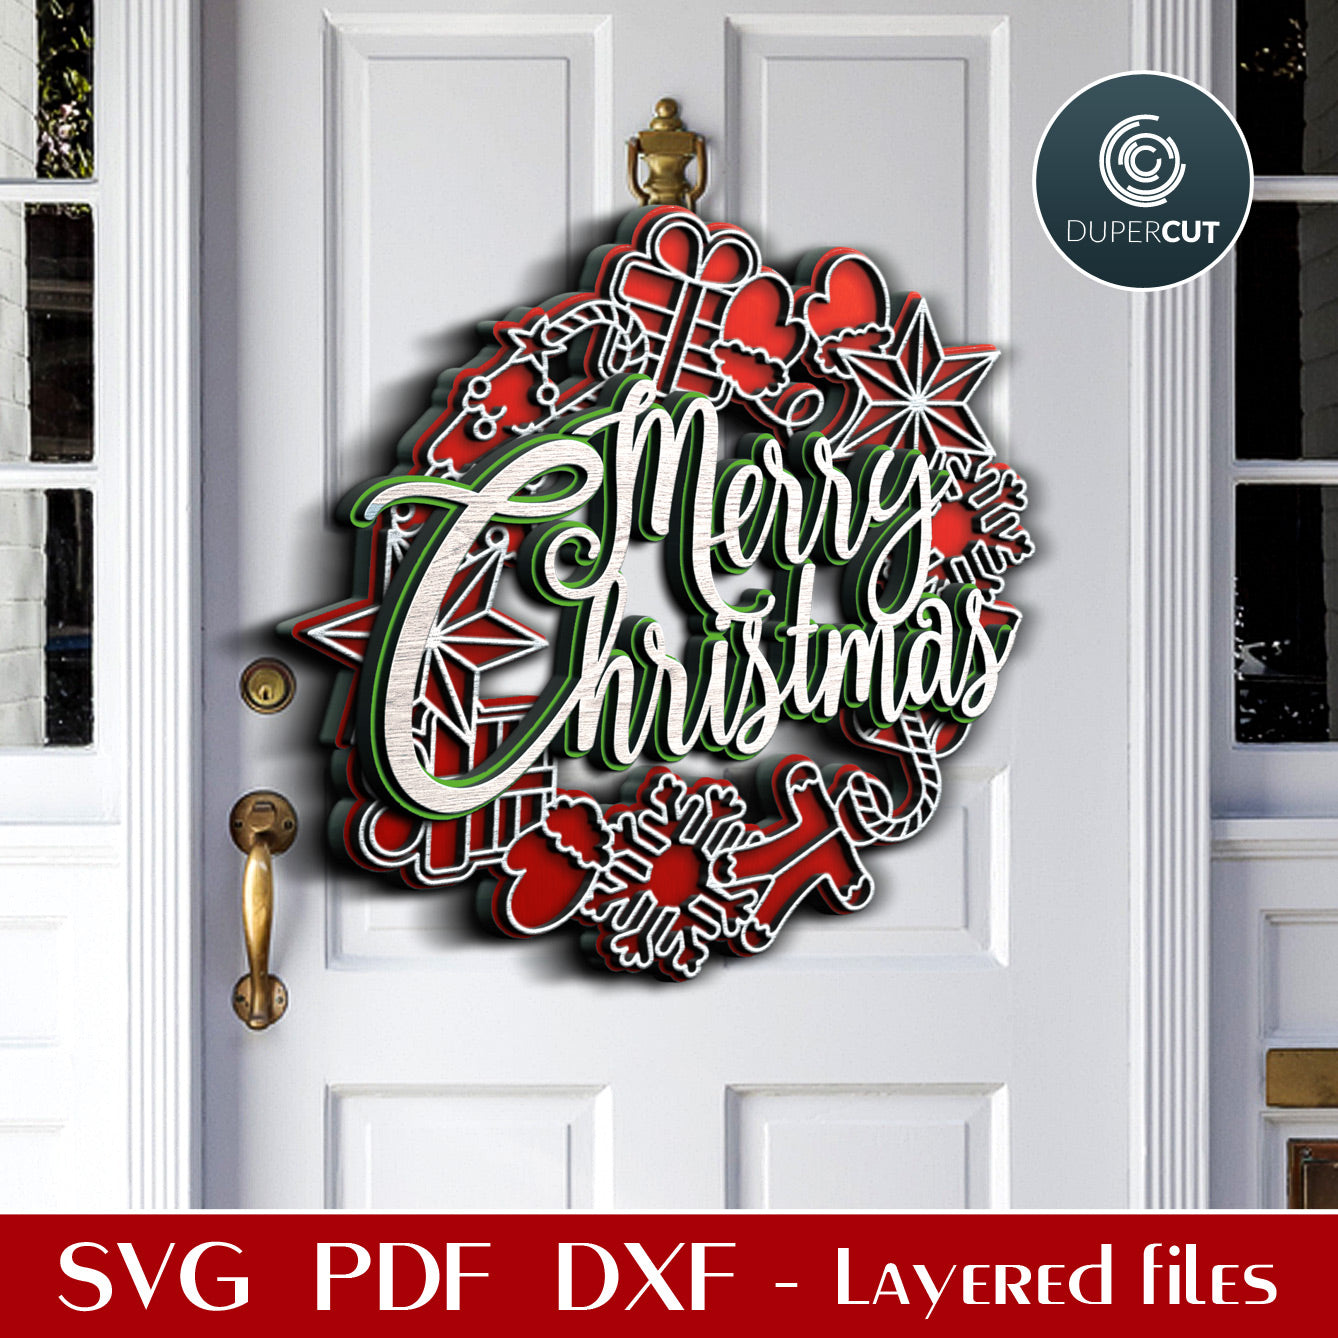 Holiday wreath door hanger - SVG PDF DXF layered files for laser and digital cutting machines - Glowforge, Cricut, Silhouette, CNC plasma by DuperCut